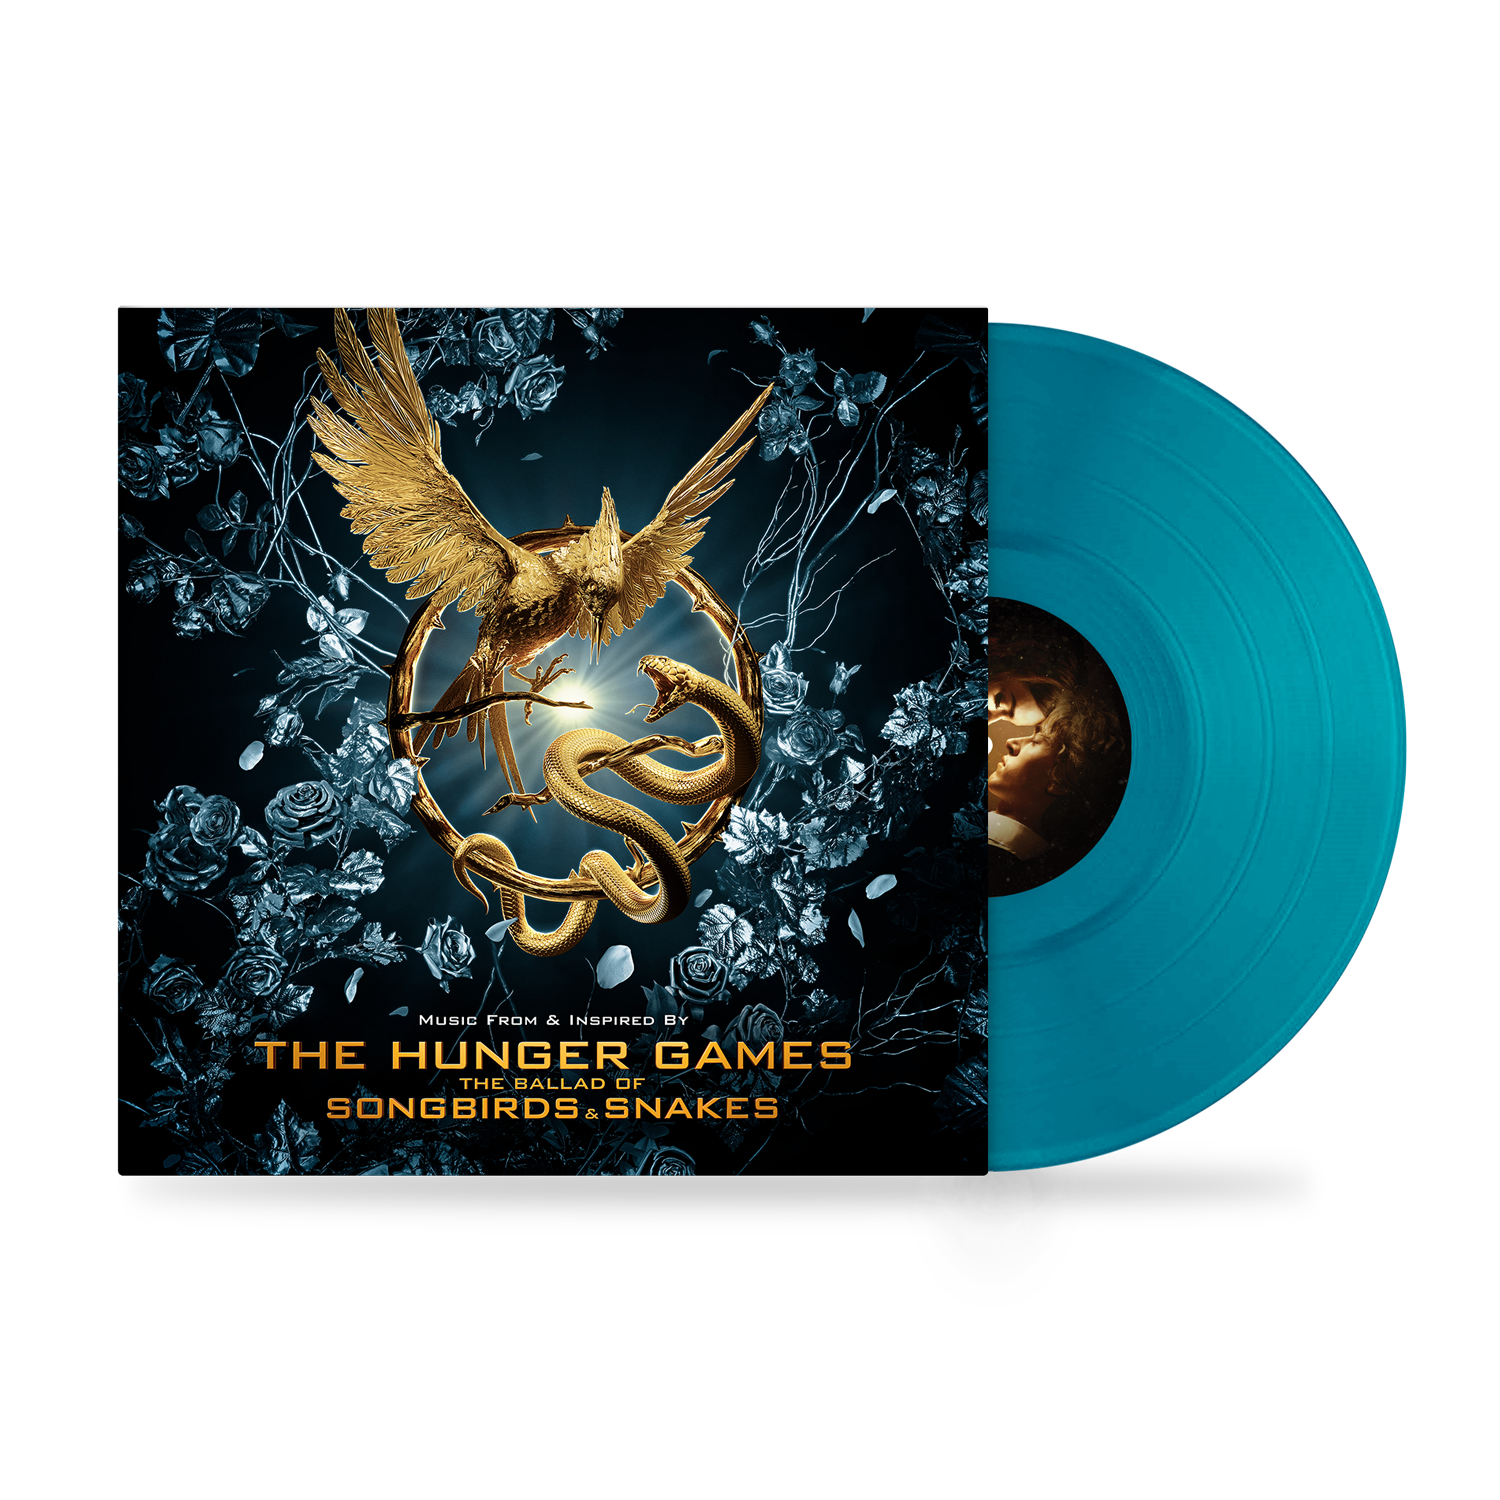 Various Artists - The Hunger Games - The Ballad of Songbirds & Snakes: Limited Blue Vinyl LP